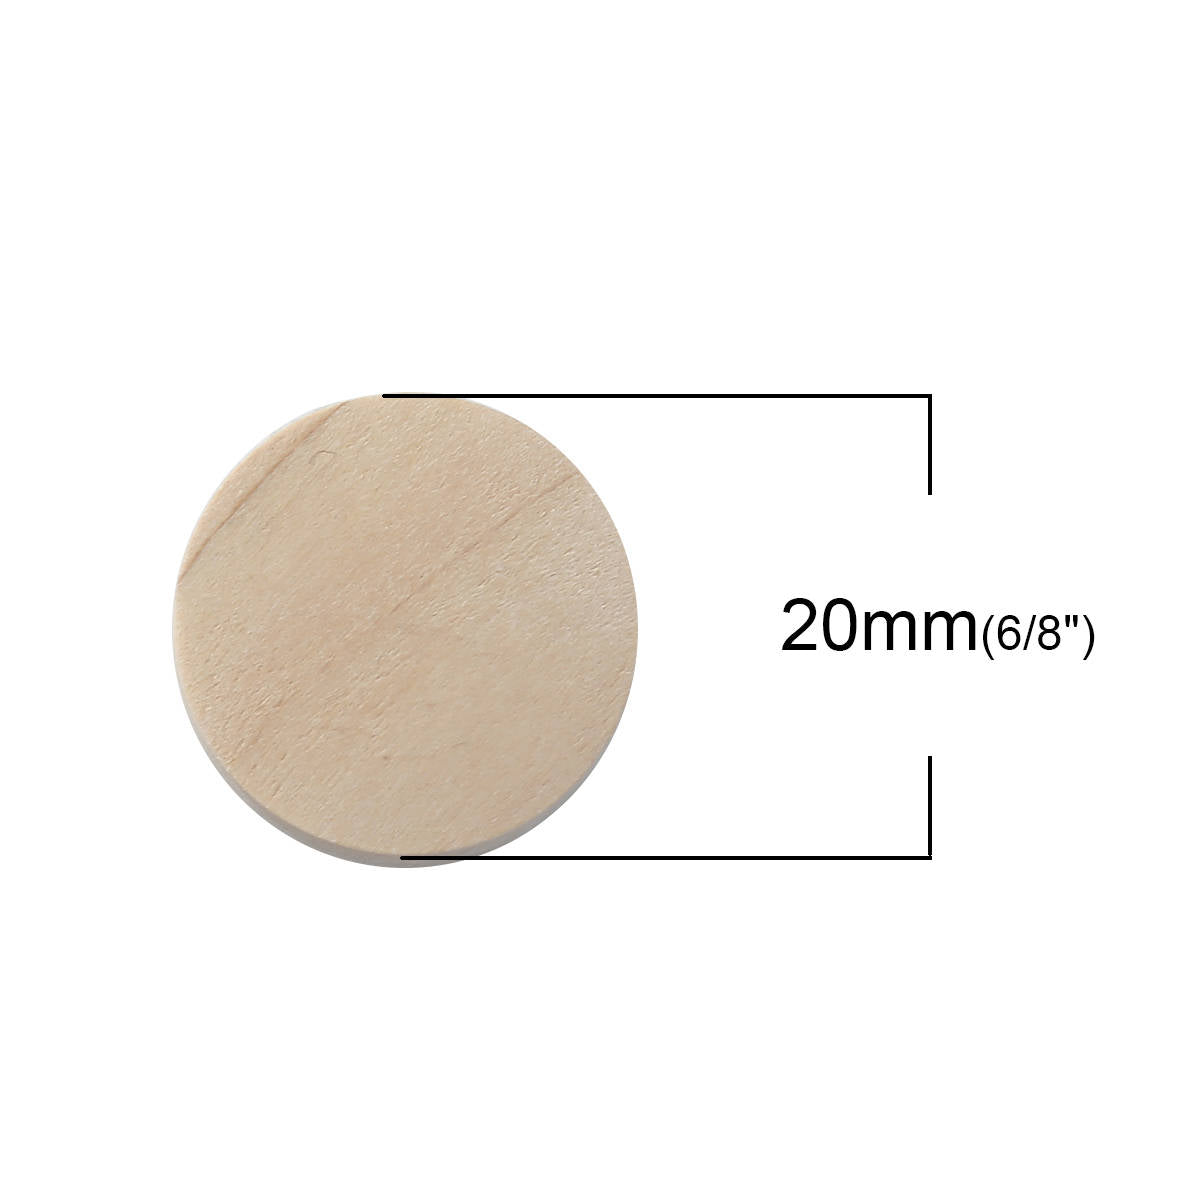 Flat wooden coin beads, Natural unfinished wood, Jewelry making